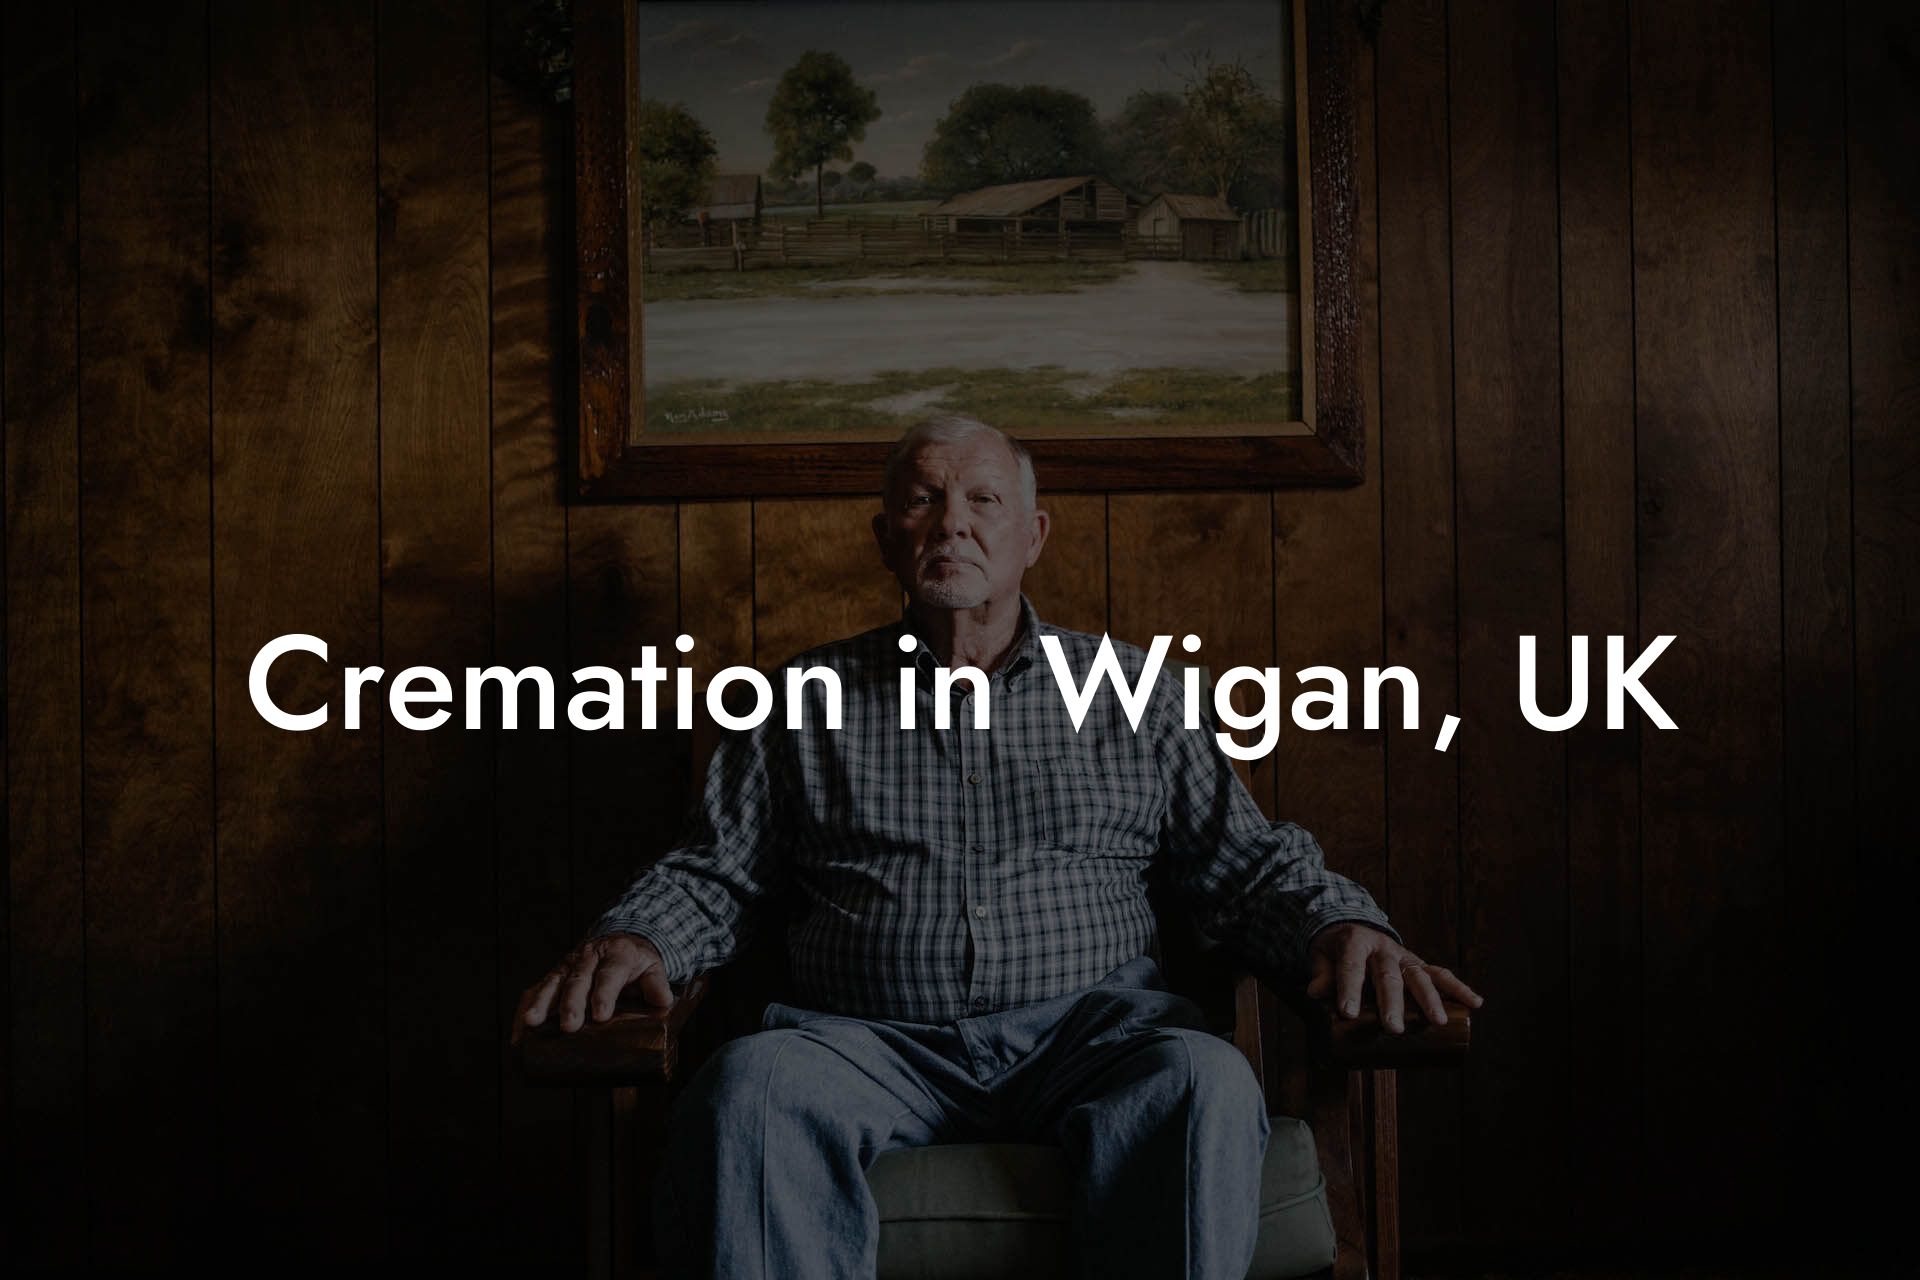 Cremation in Wigan, UK